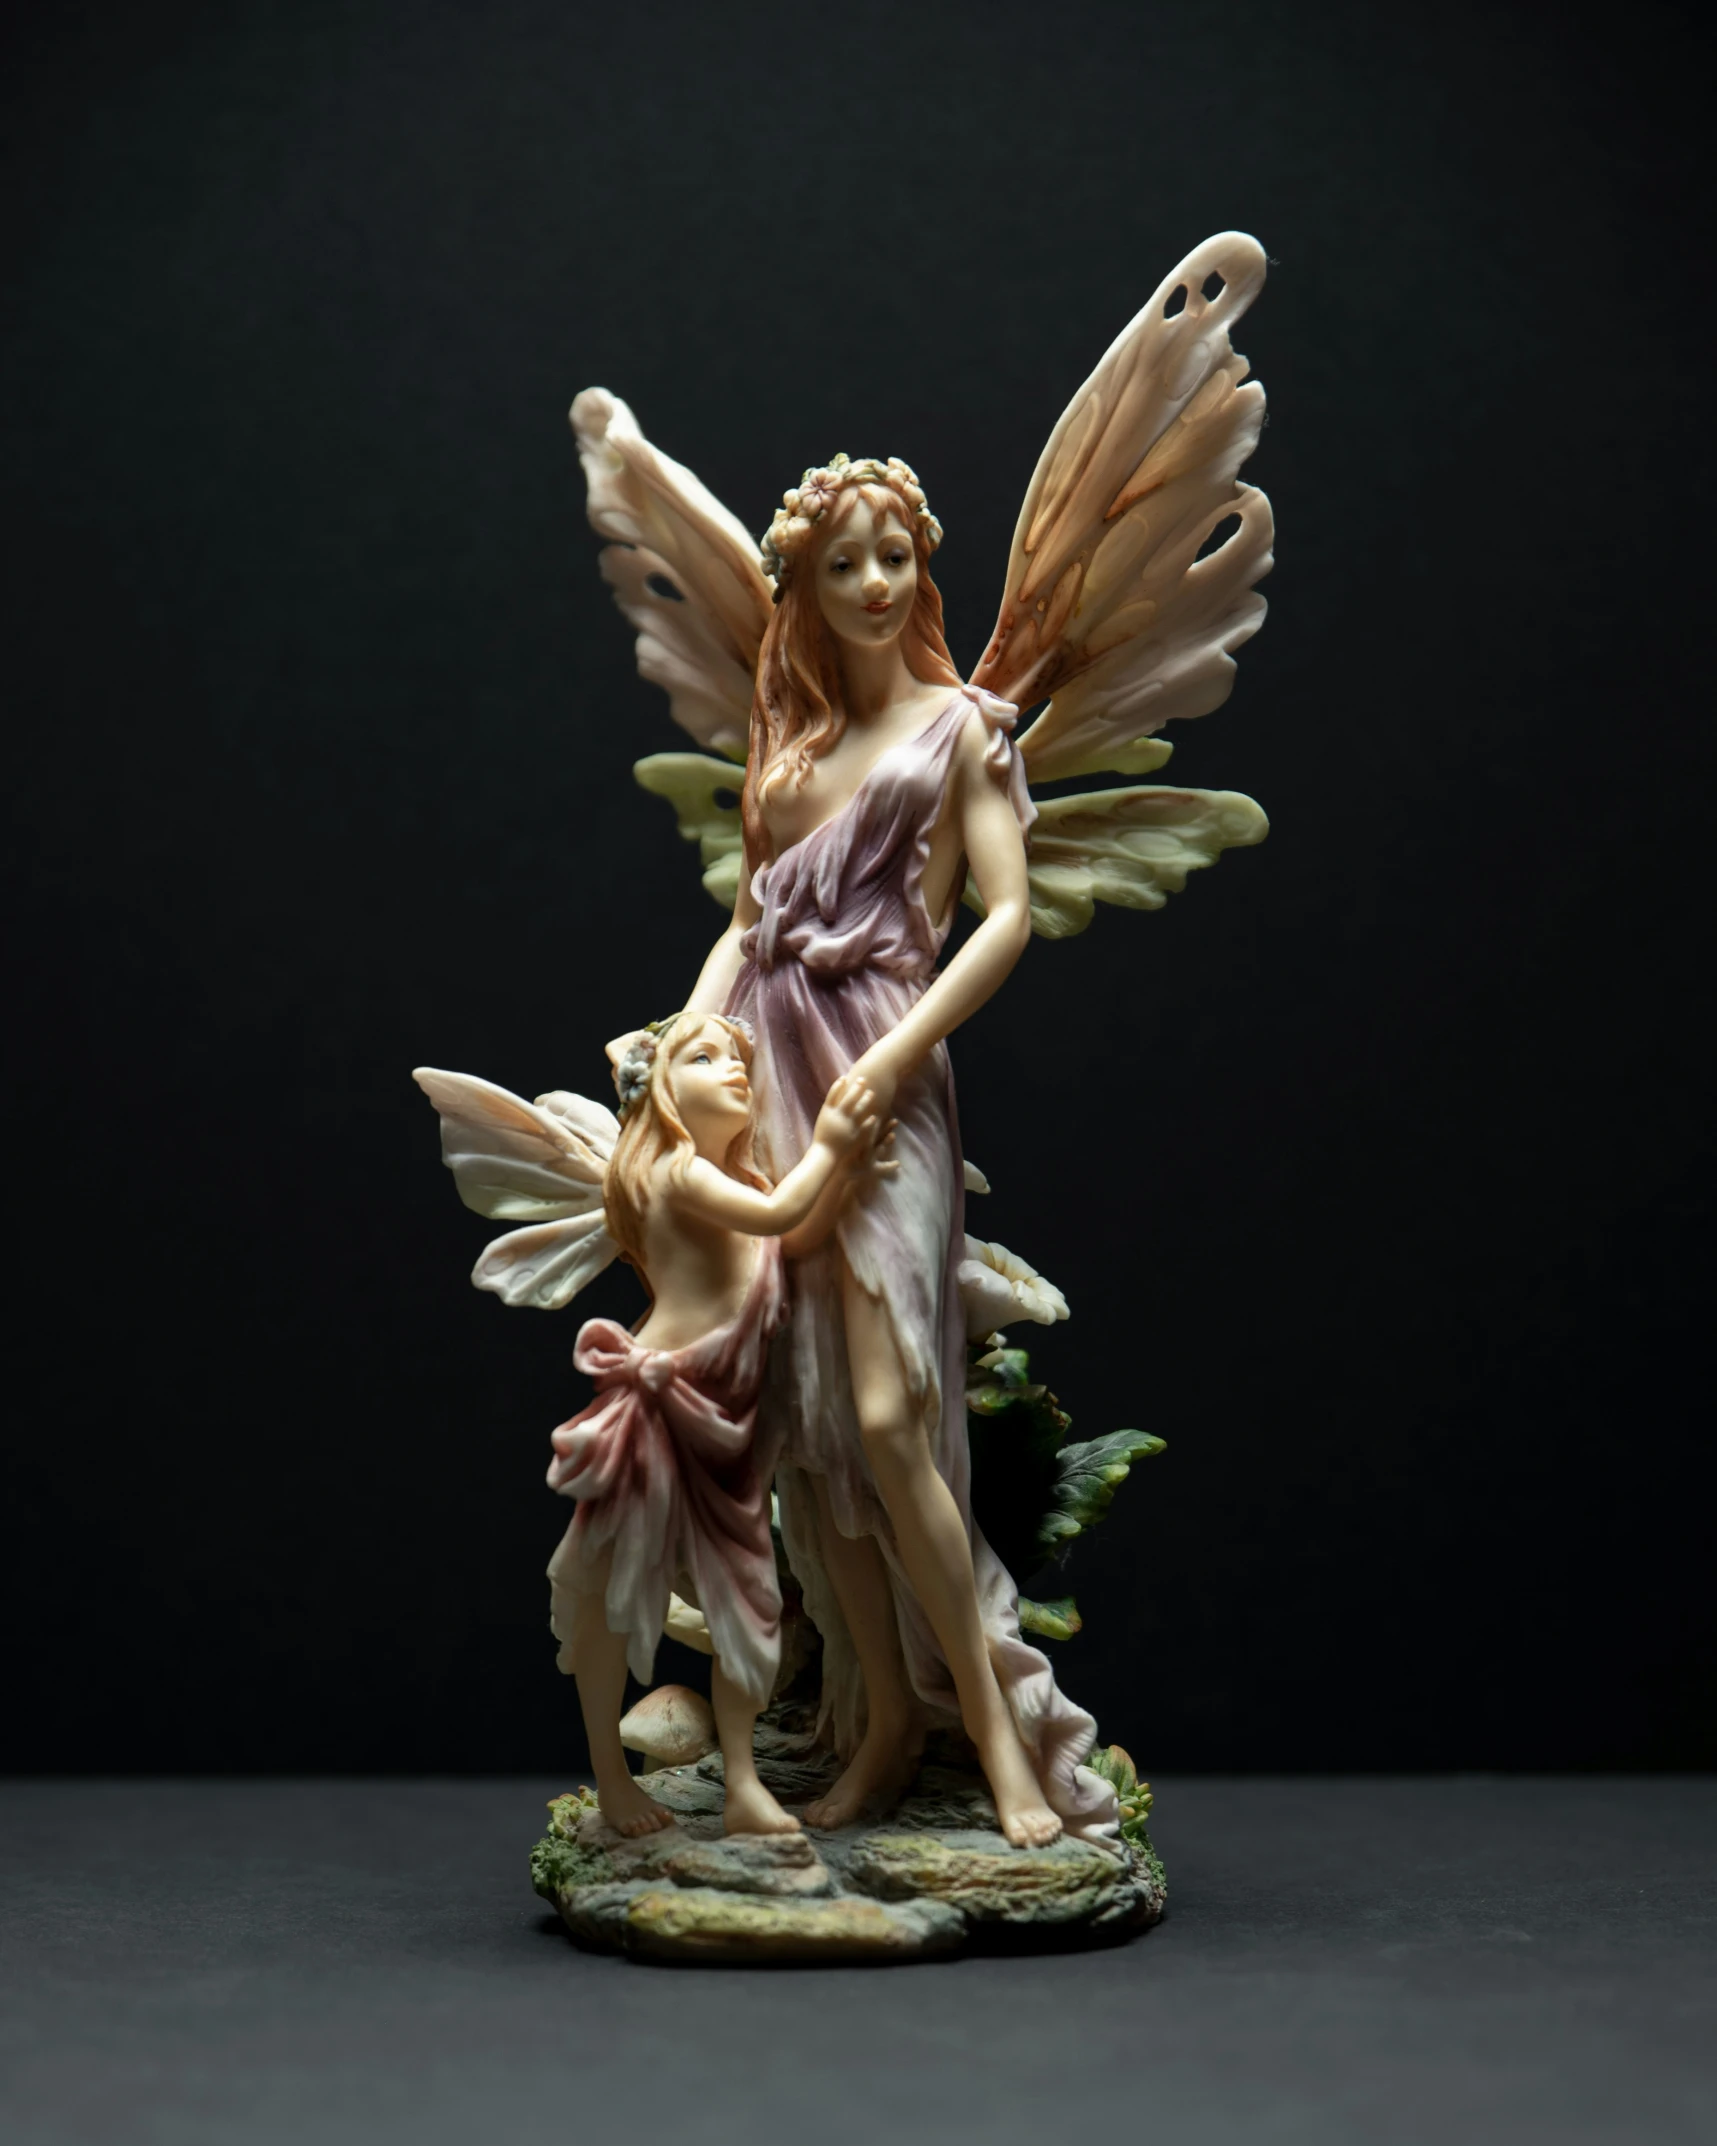 the statue depicts an angel with a child